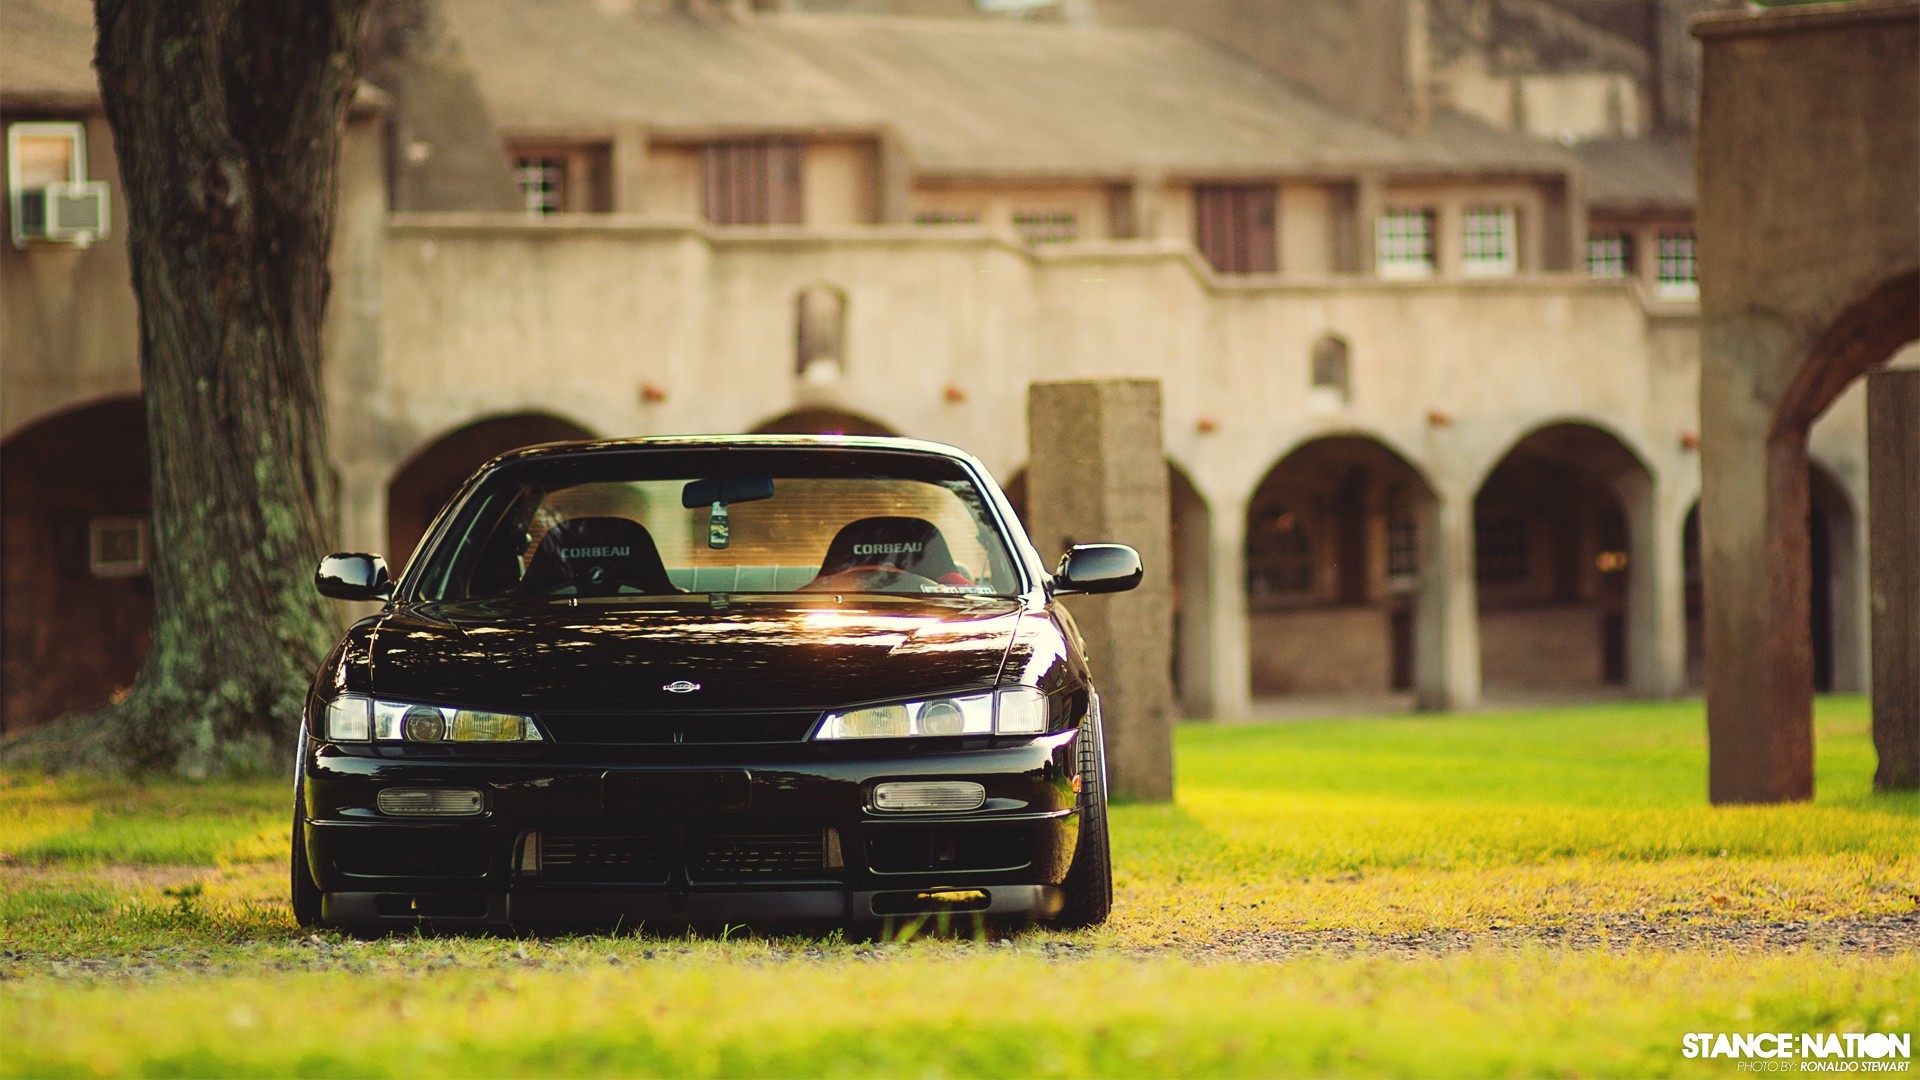 General 1920x1080 Nissan Silvia S14 Nissan Silvia Nissan Japanese cars frontal view black cars Stance Nation vehicle car